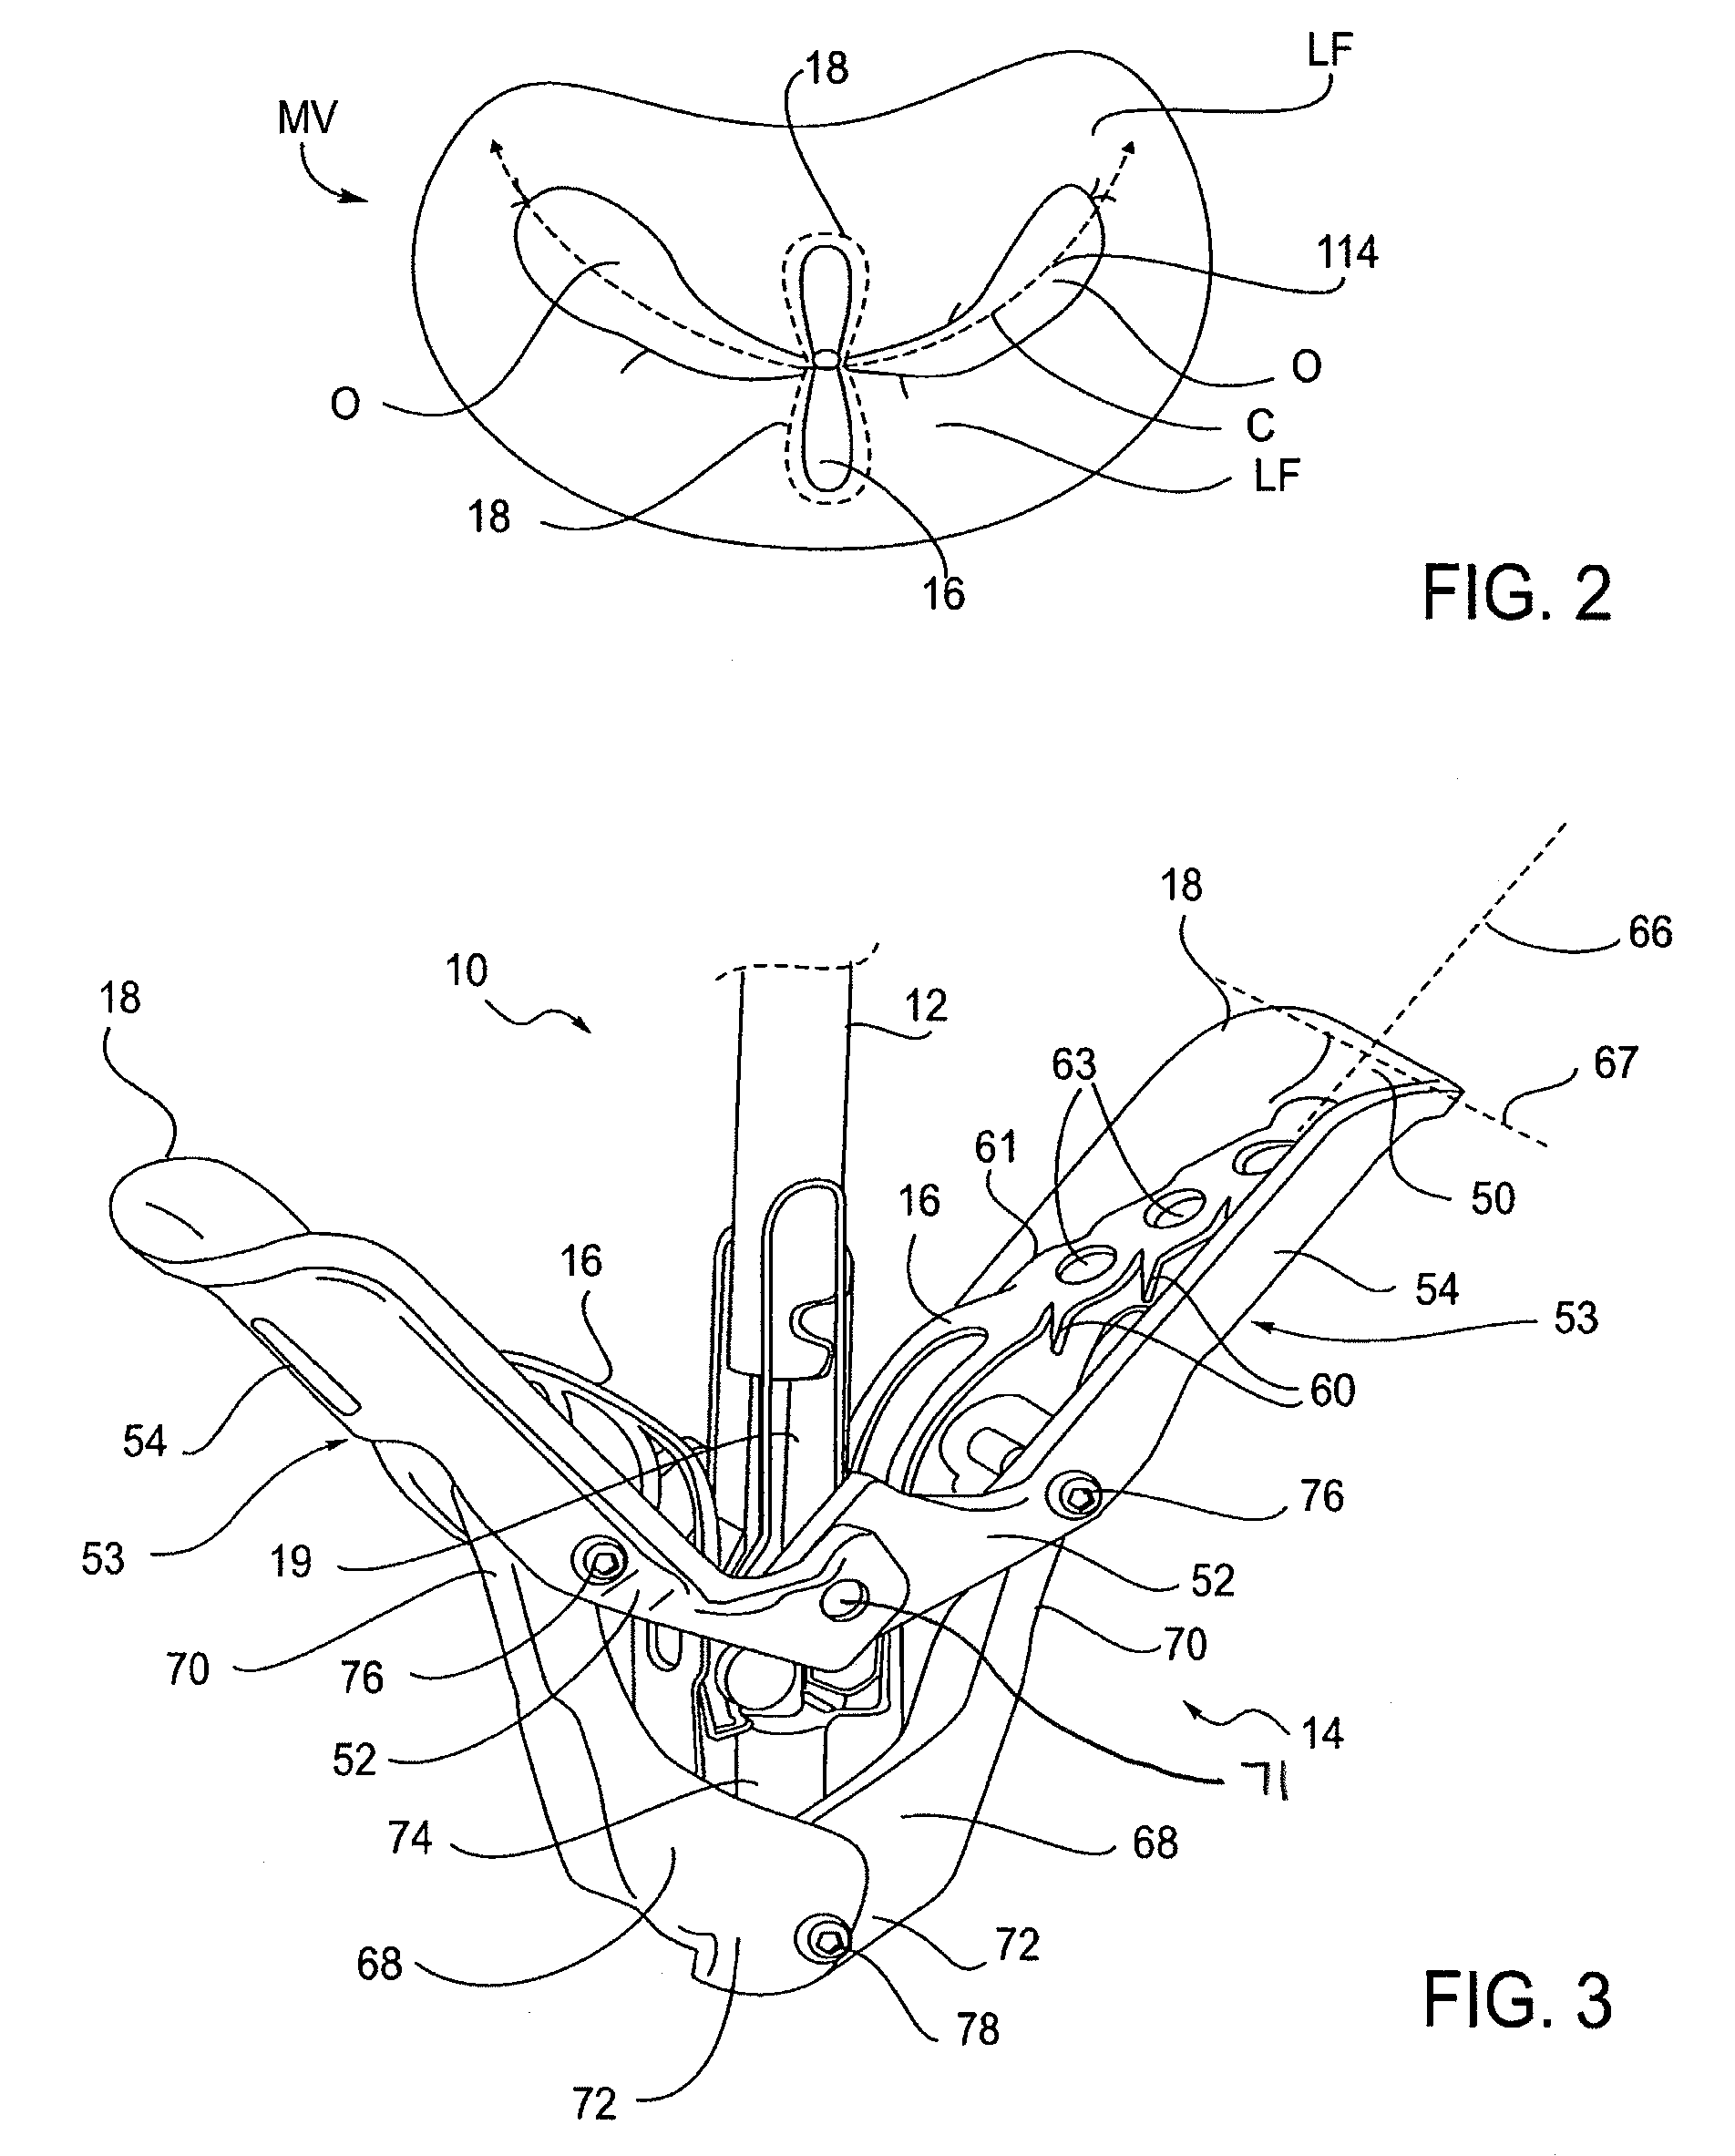 Fixation devices for variation in engagement of tissue